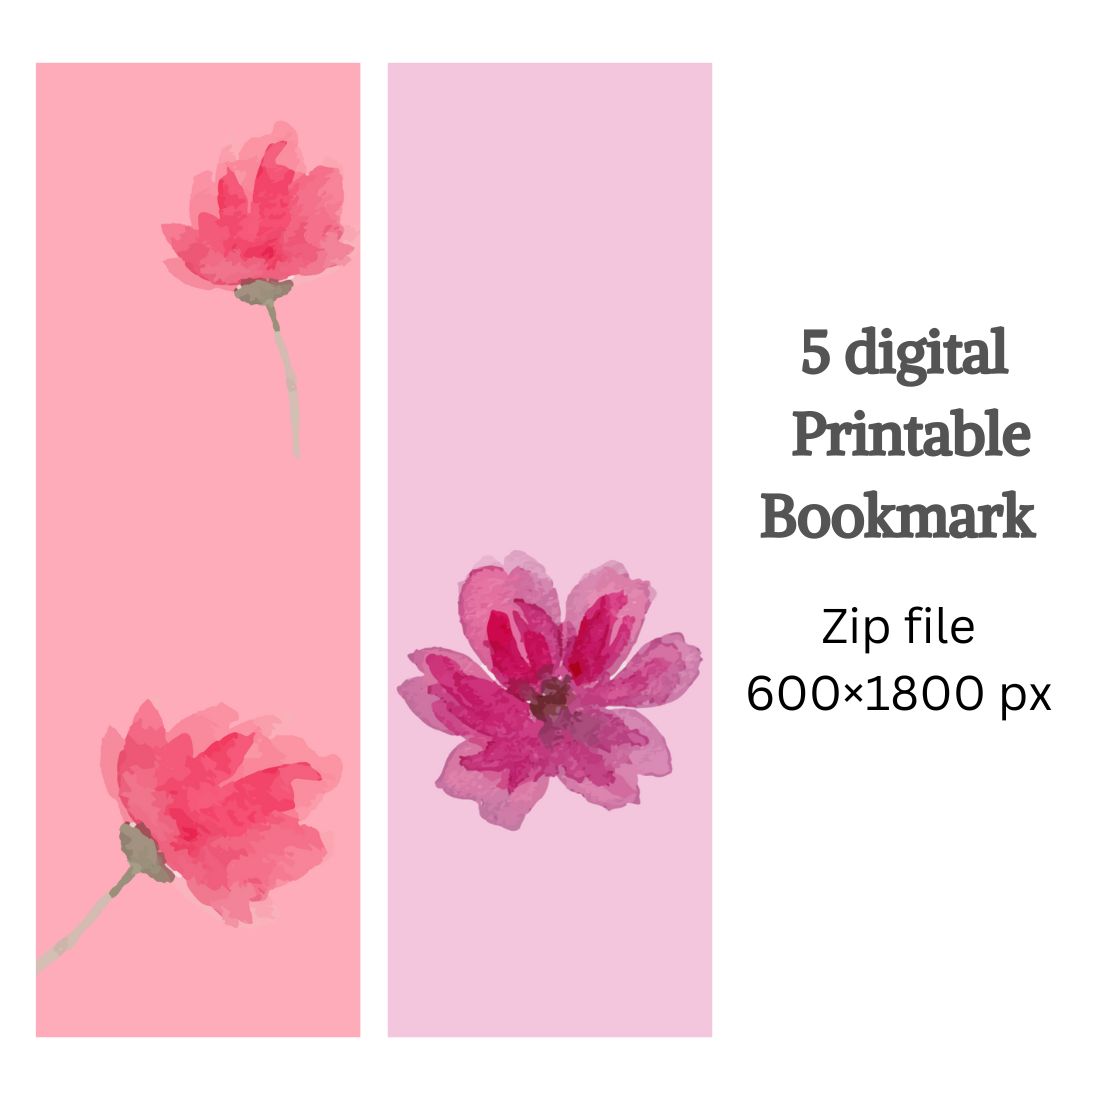 Colored Digital Bookmark preview image.